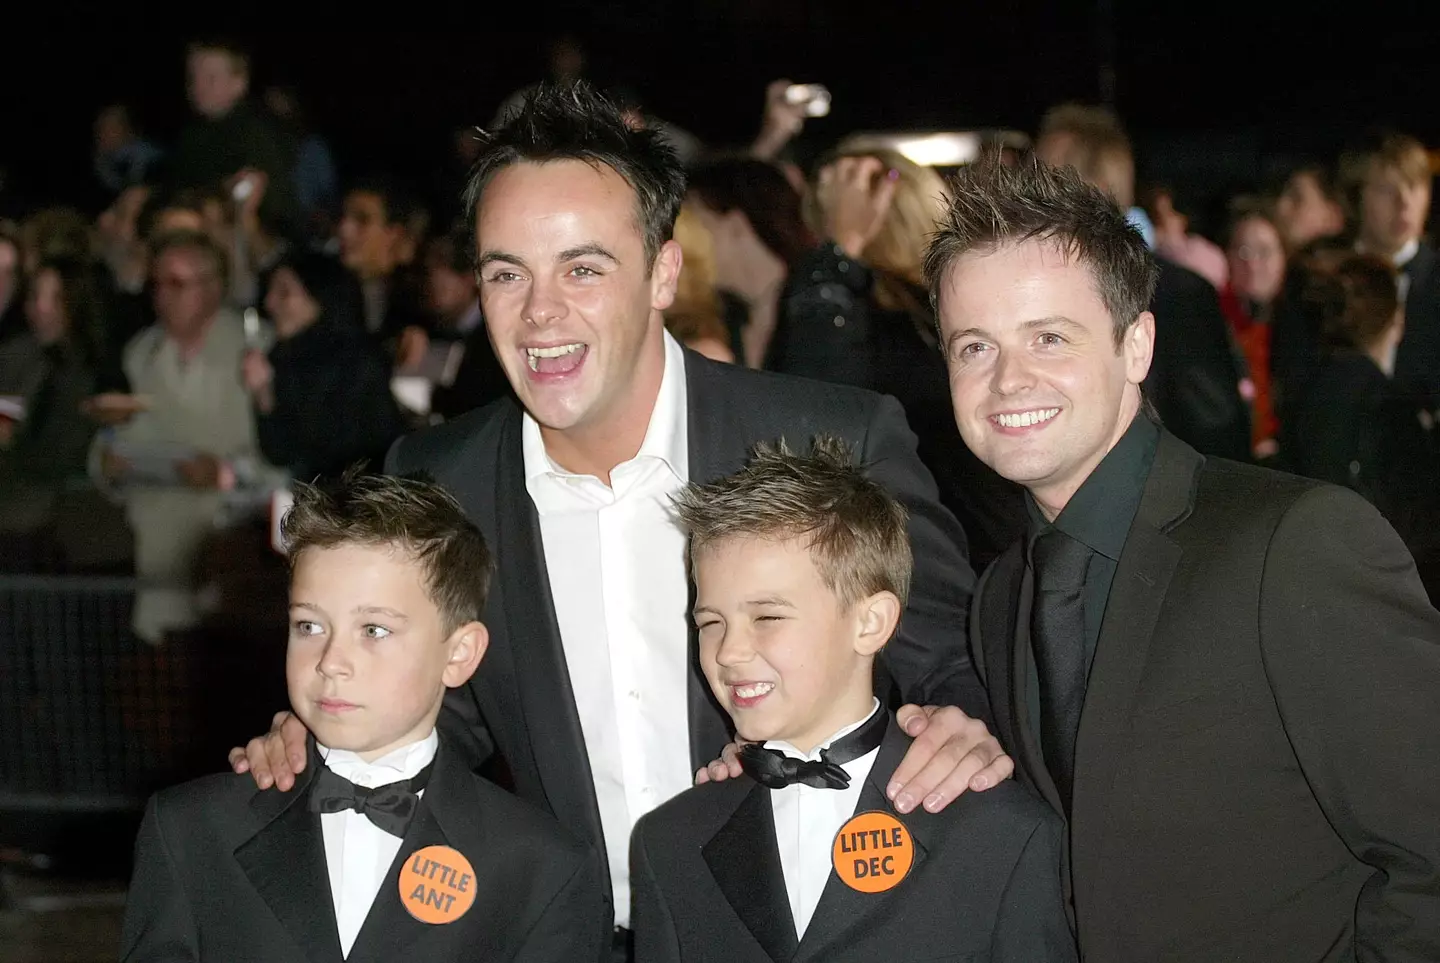 Little Ant and Dec now live their lives out of the limelight.